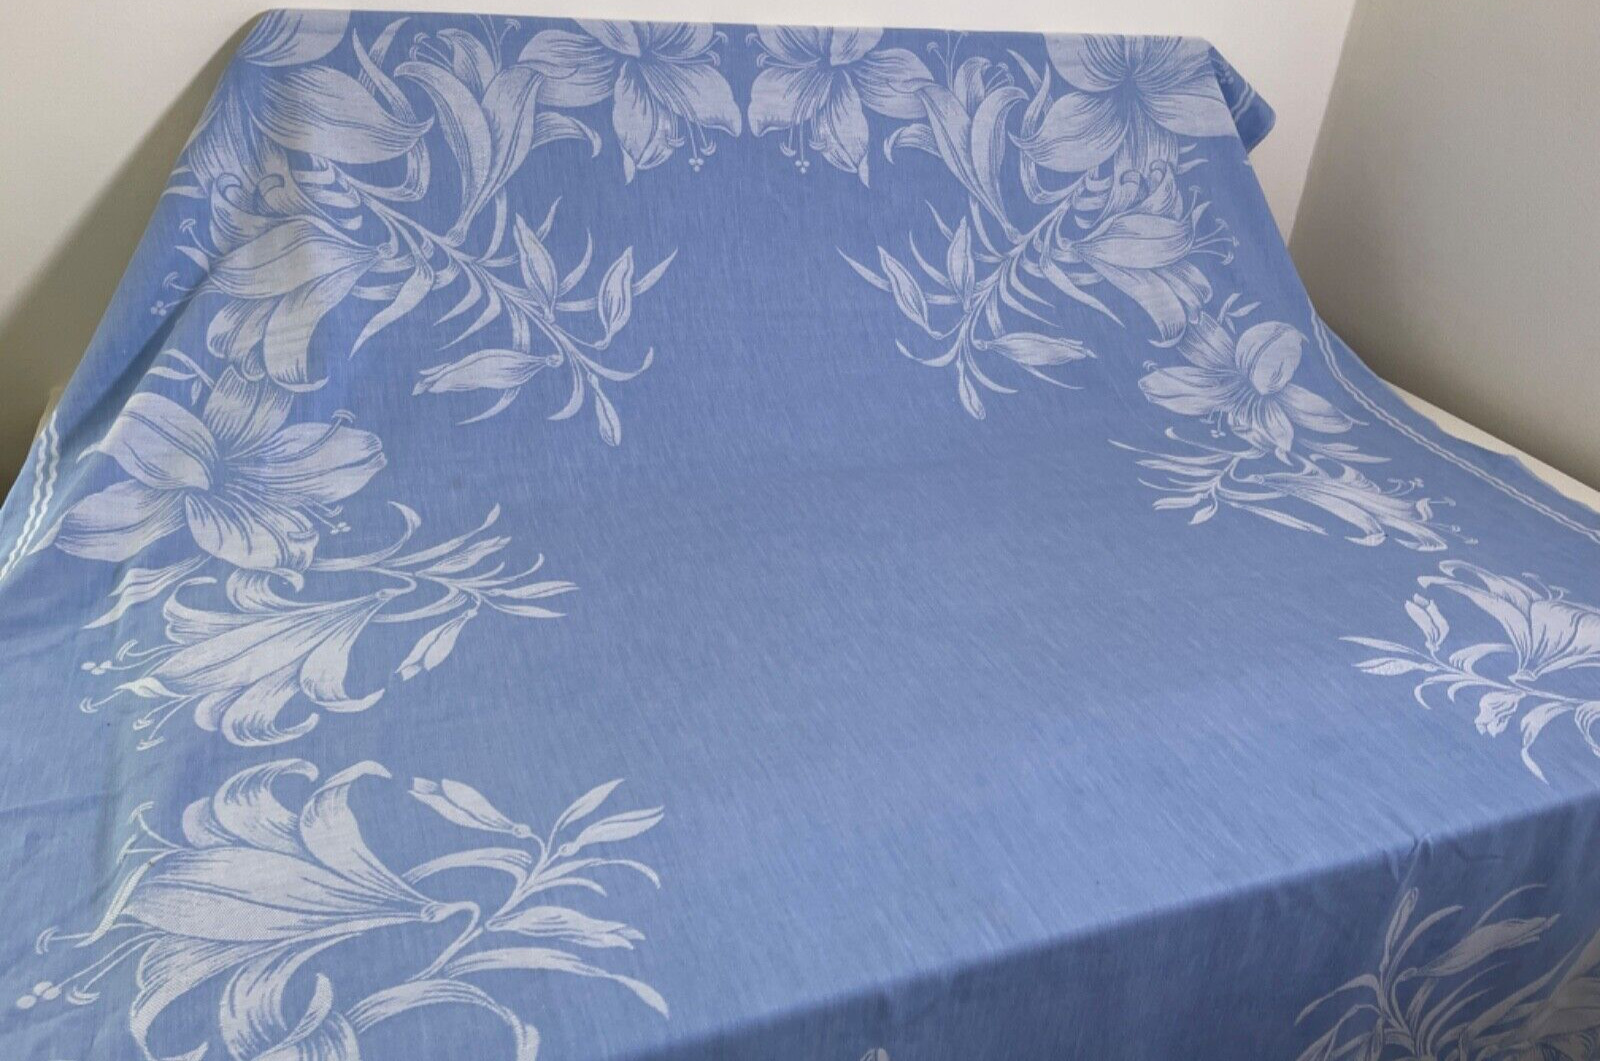 Vintage Mid Century Modern Cotton Damask Tablecloth Blue & White Lilies YY924